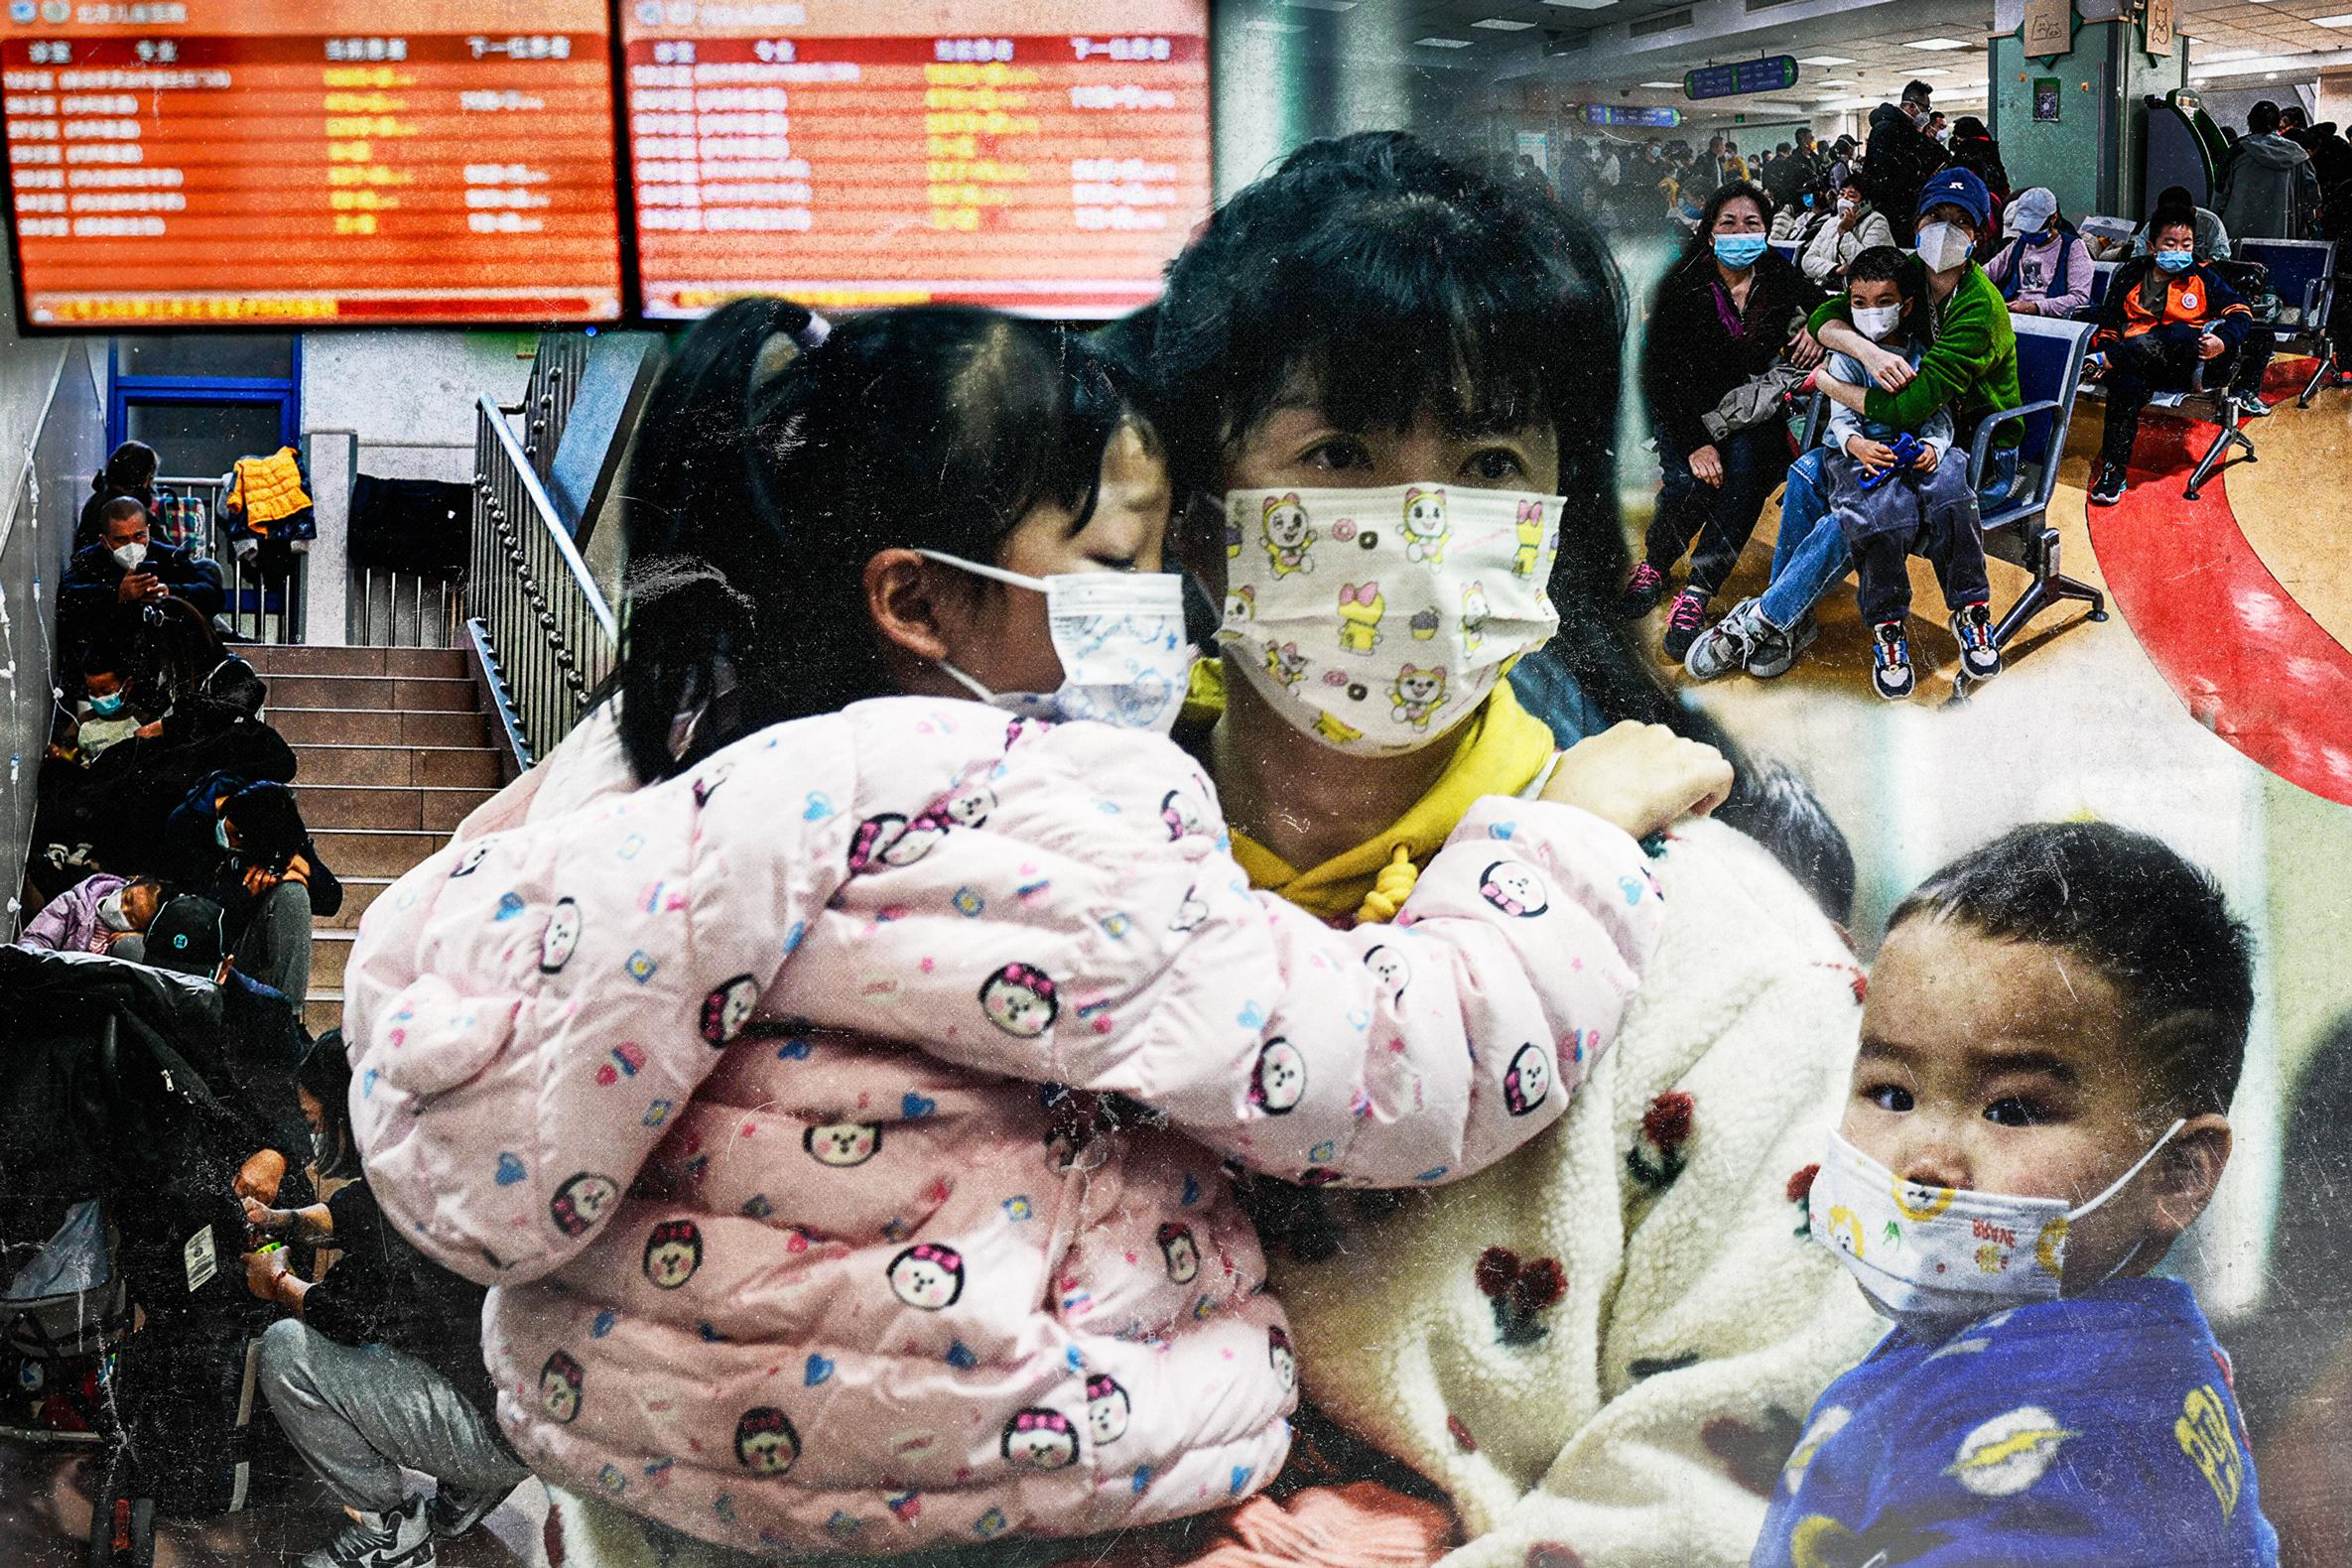 CCP Deploys Cover Up on Mysterious Pneumonia Outbreak in Children